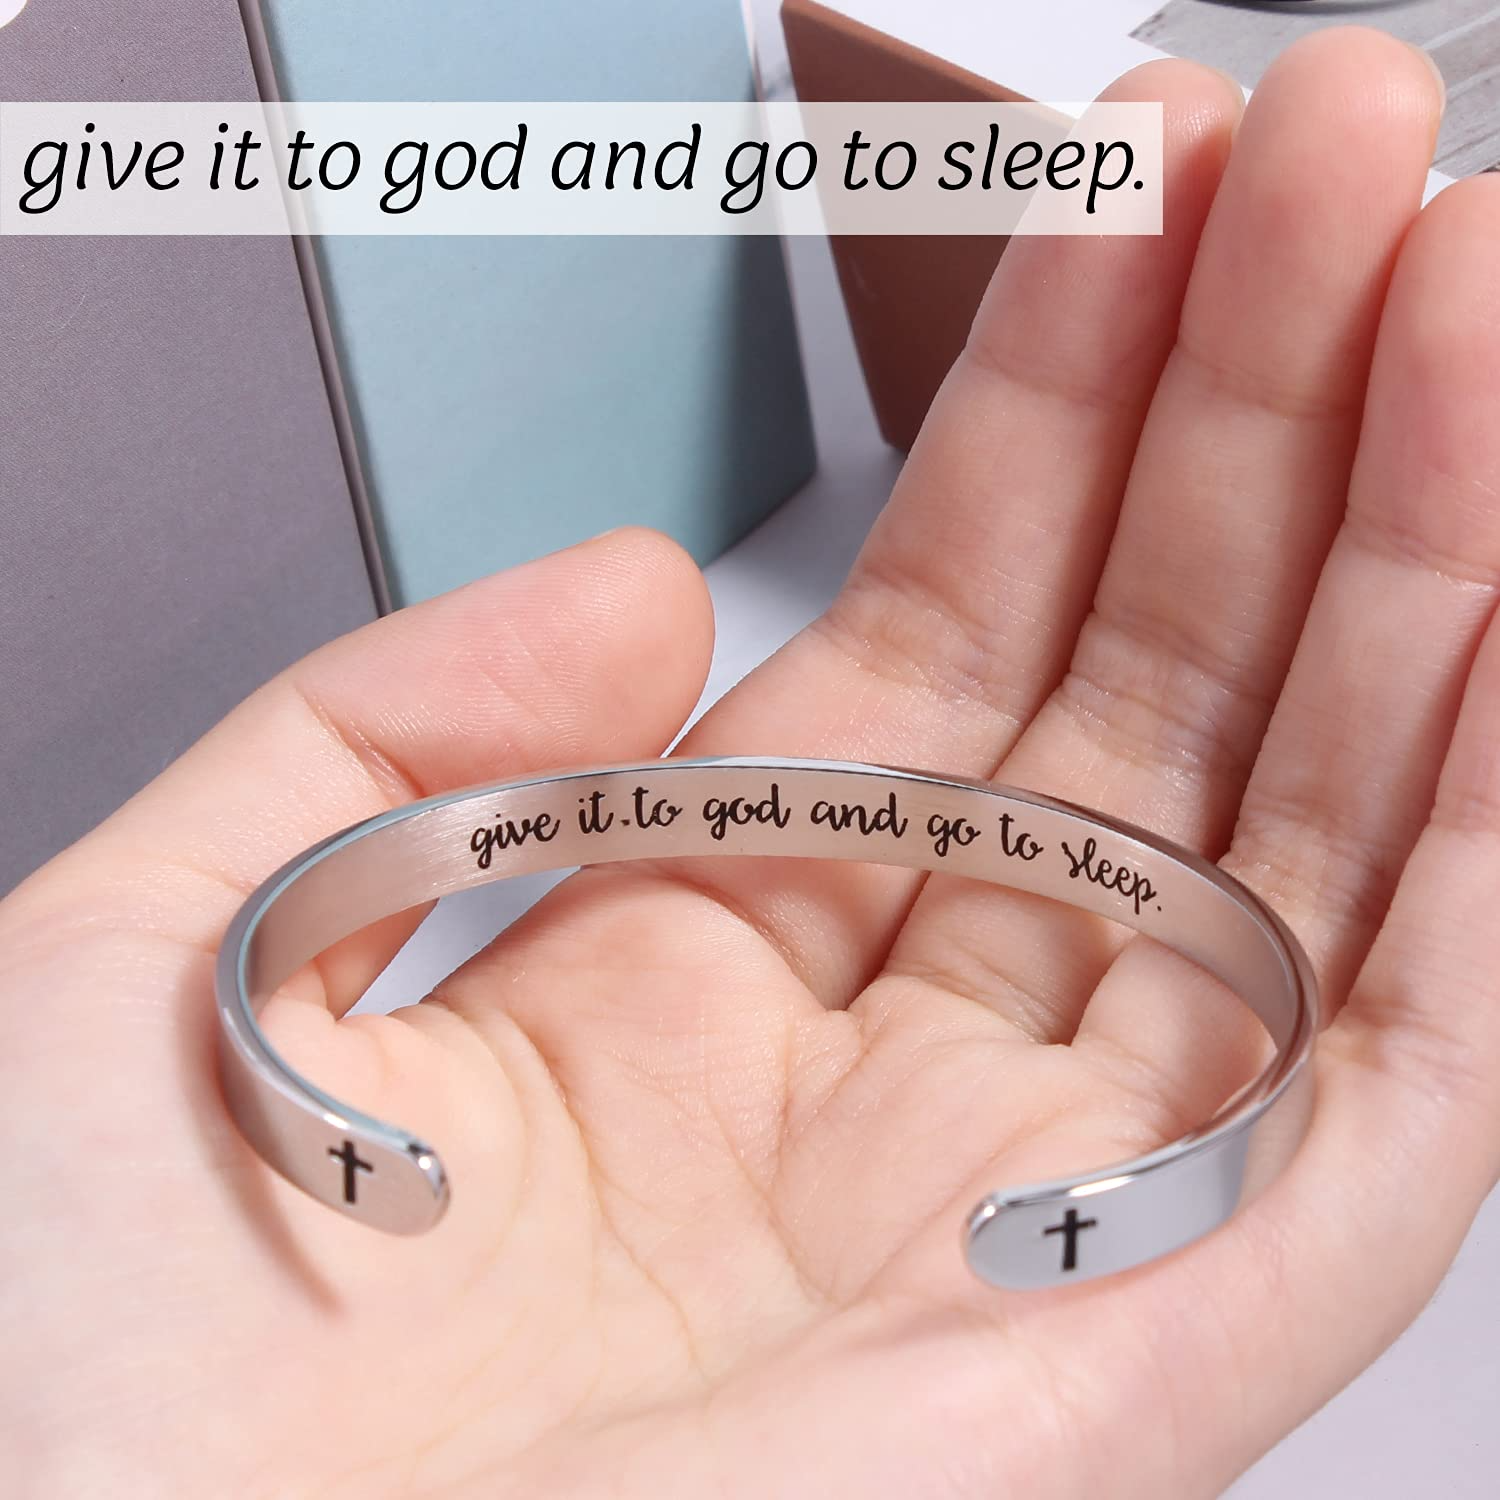 Give it to god and go to sleep